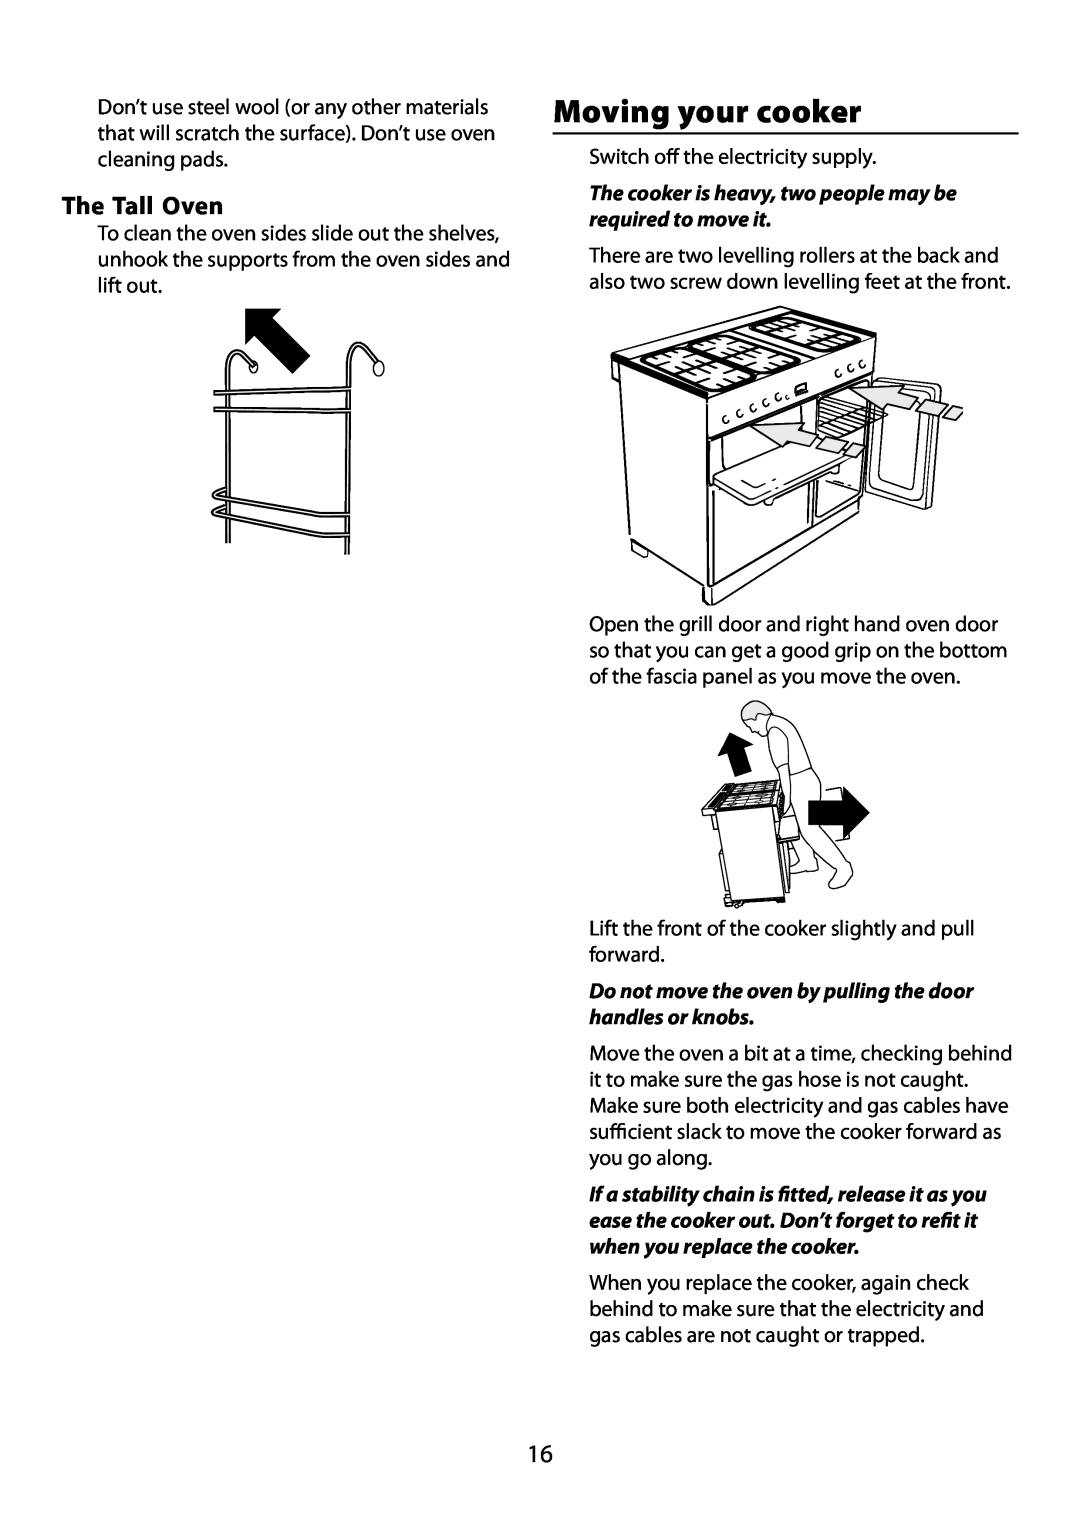 Garmin 210 GEO T DL user manual Moving your cooker, The Tall Oven 